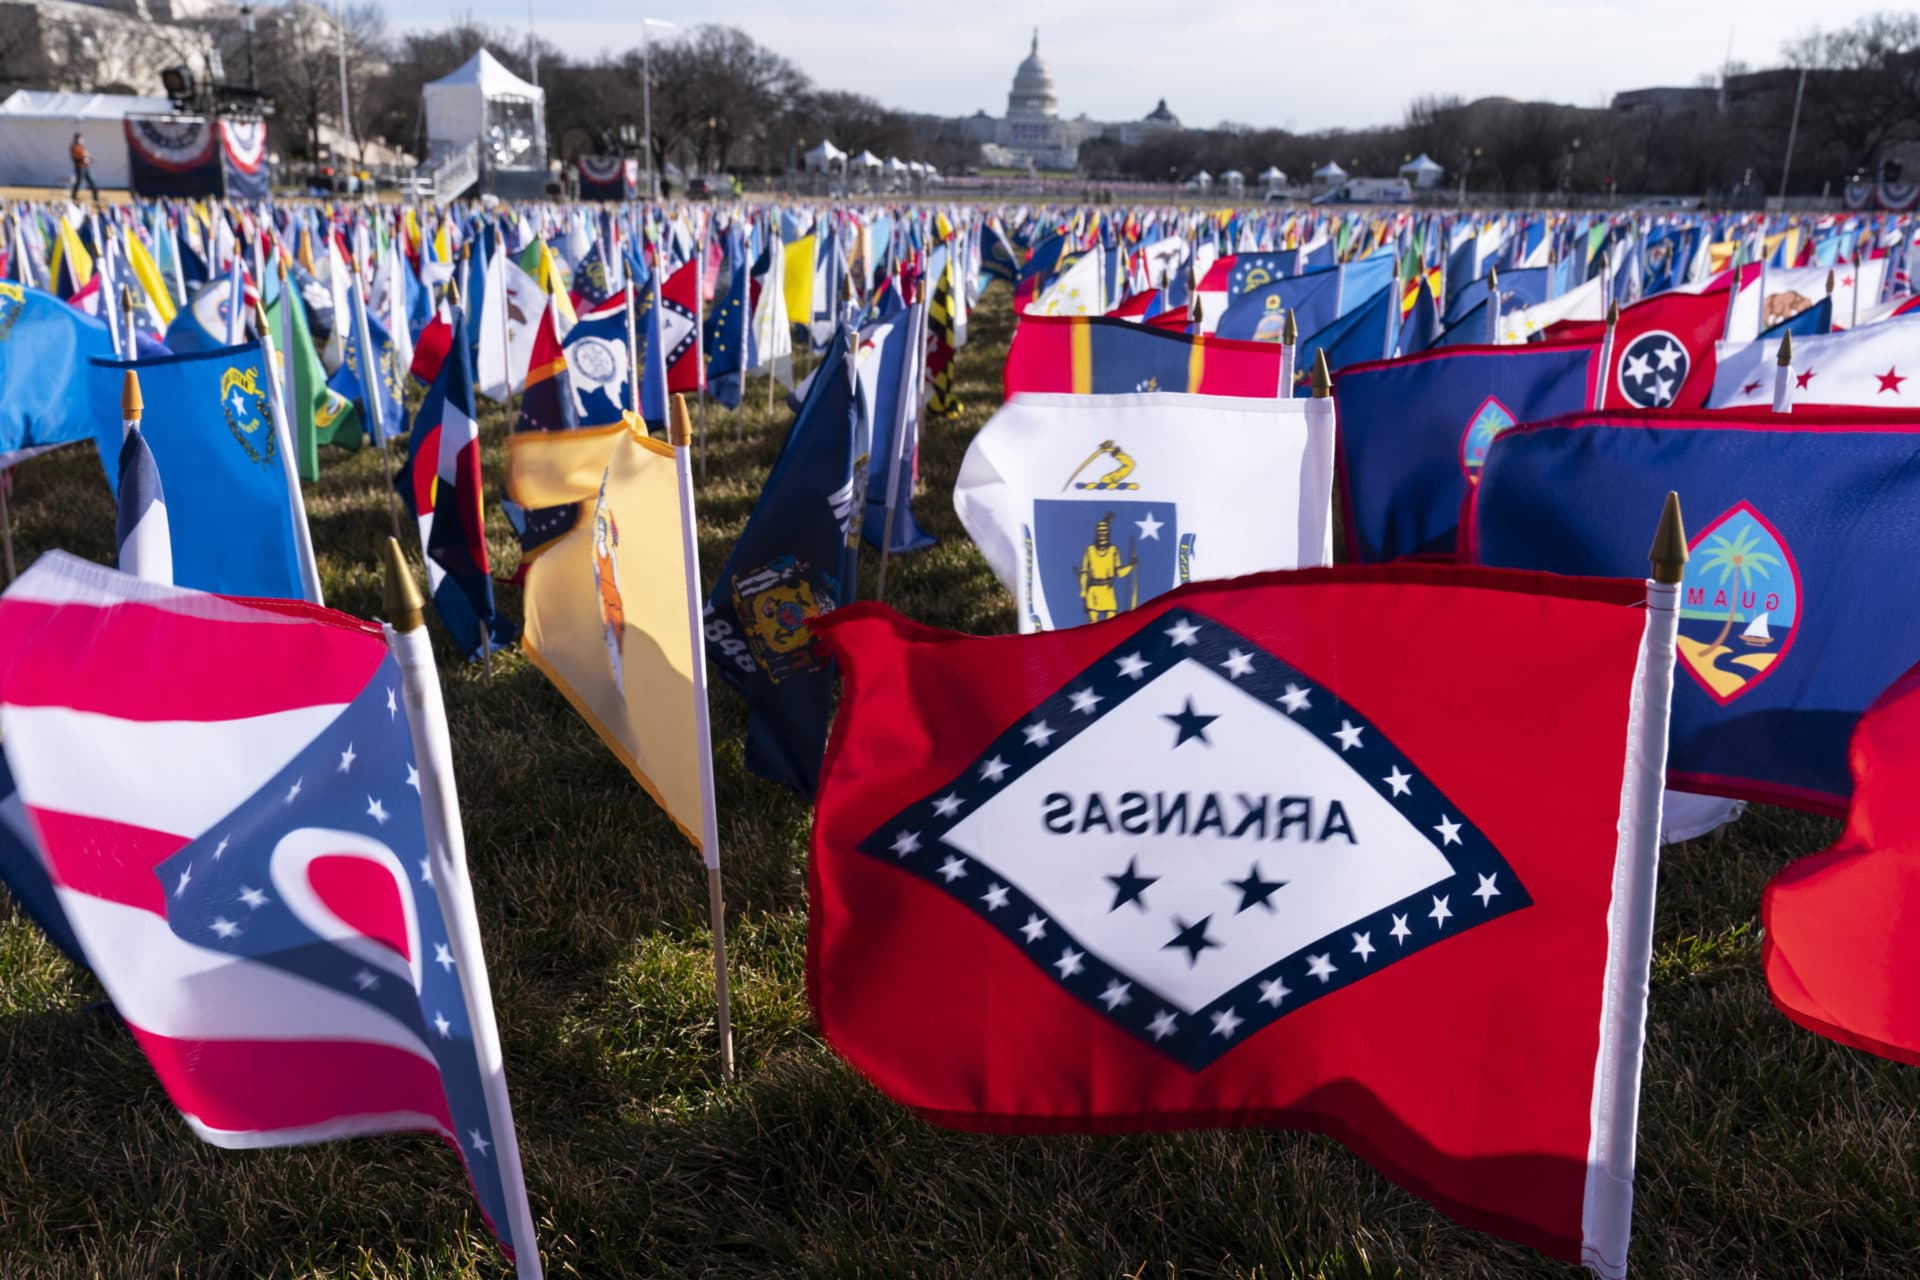 State flags are placed on the National Mall ahead of the inauguration. (Alex Brandon/AP)